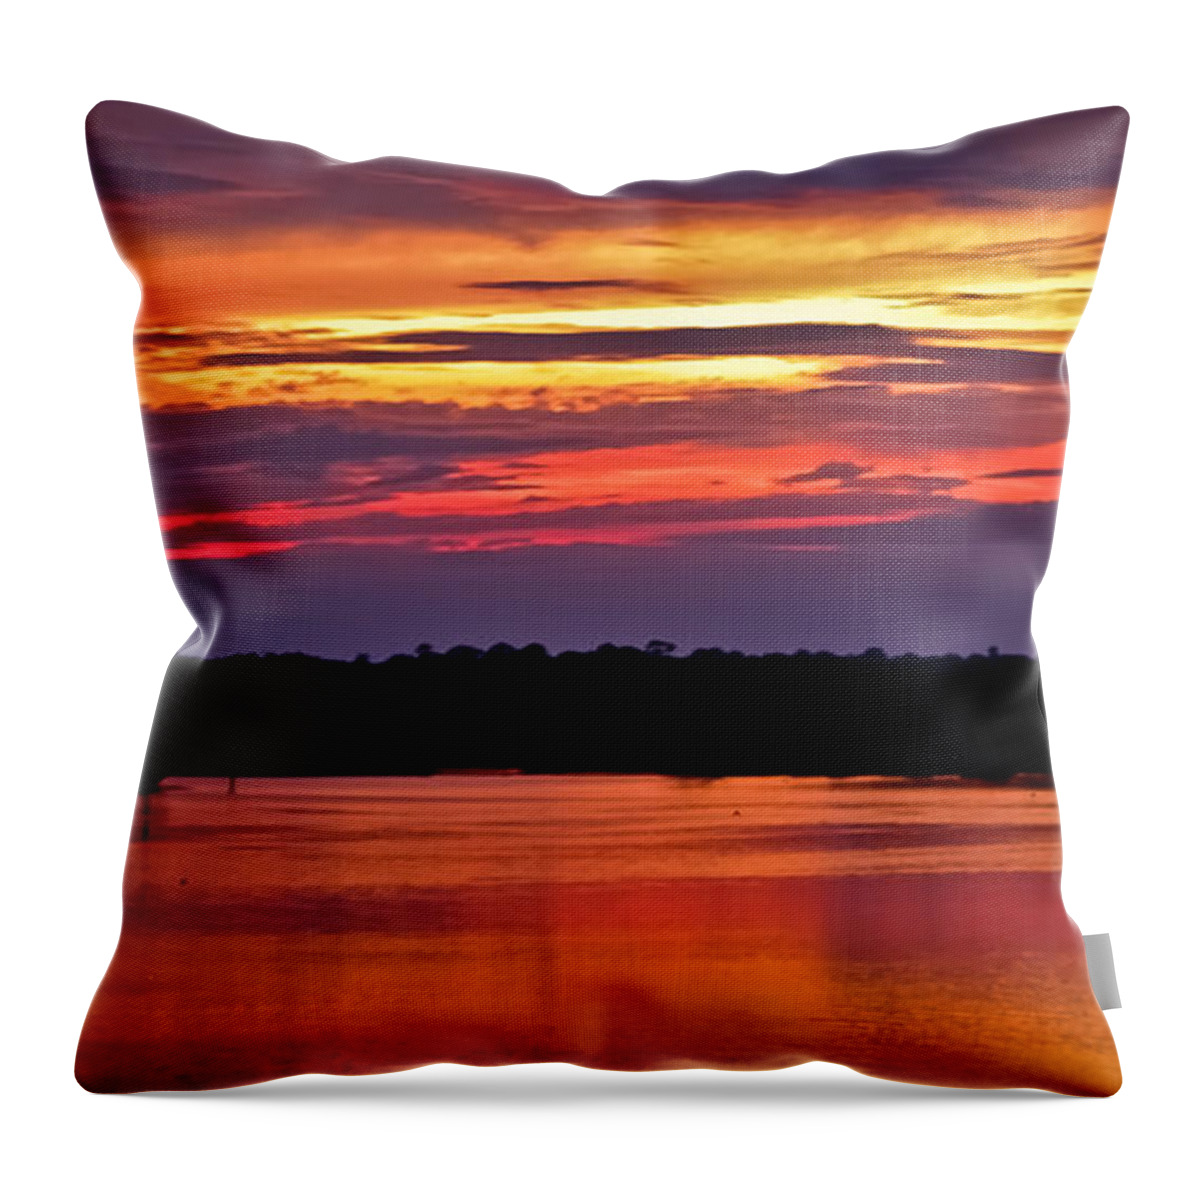 Tomoka River Throw Pillow featuring the photograph Sunset Over the Tomoka by DigiArt Diaries by Vicky B Fuller